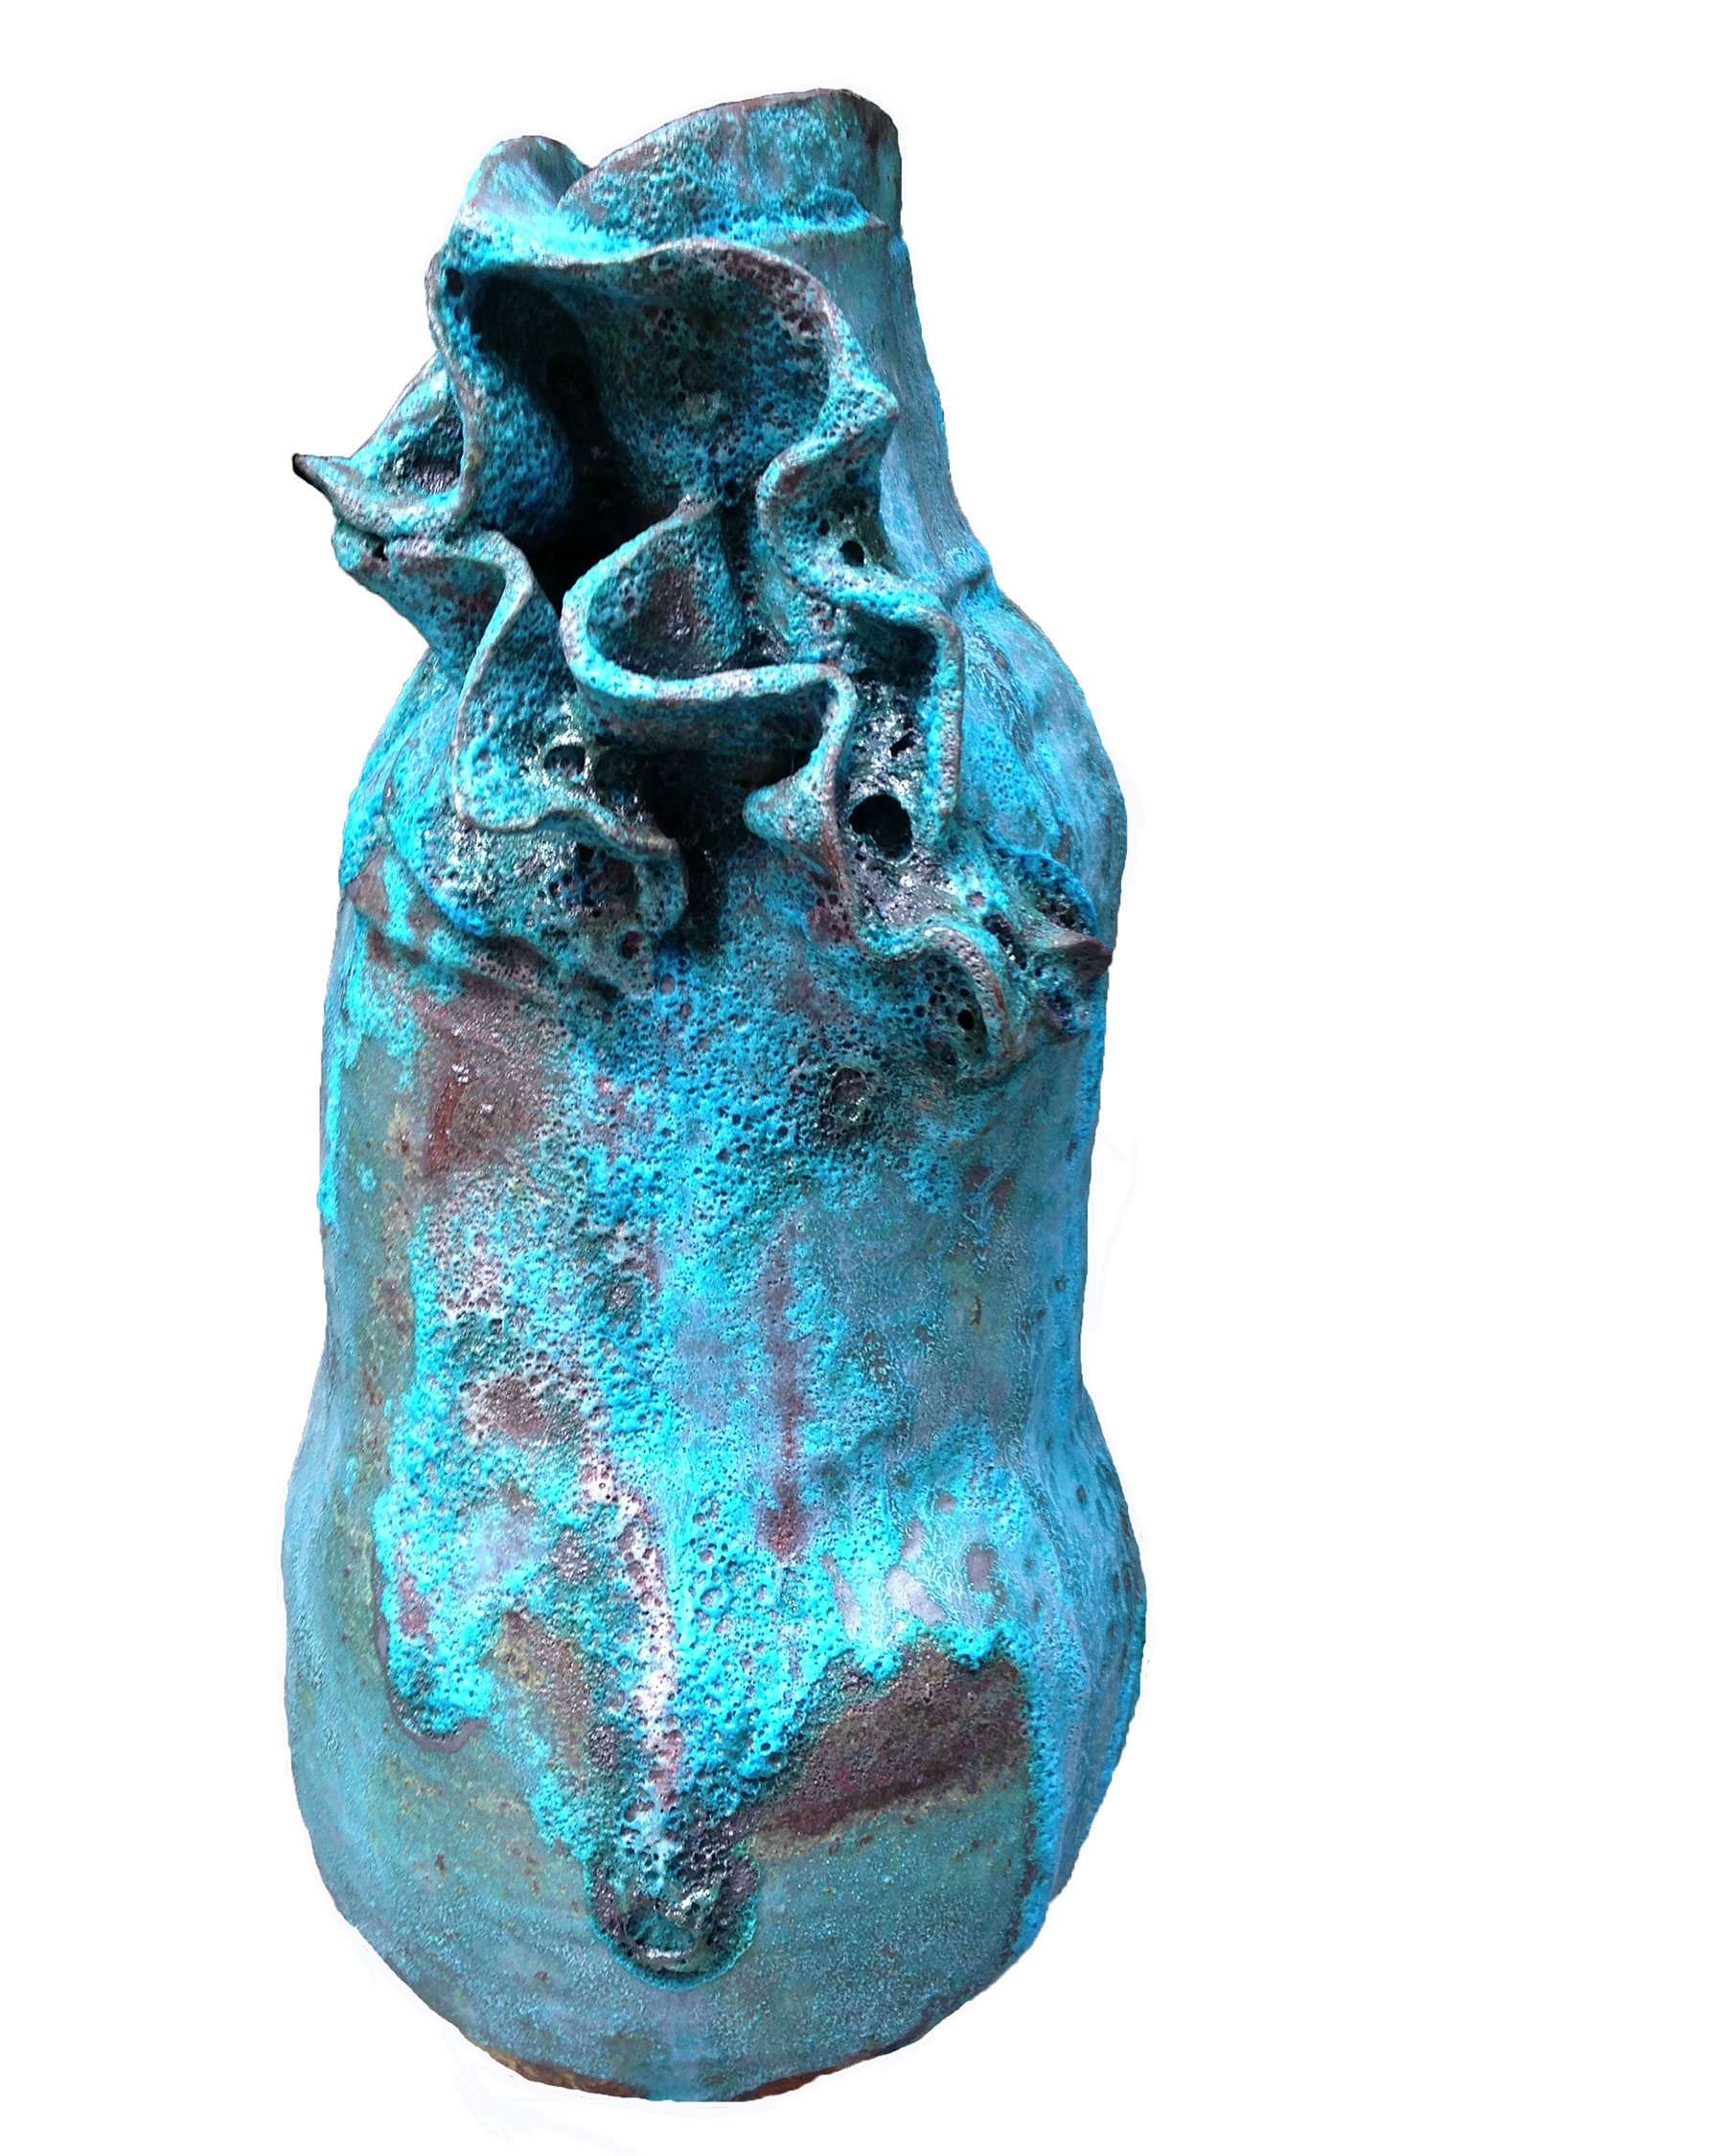 blue ceramic sculpture that is a shape similar to that of a vase, but much more organic and hand made.